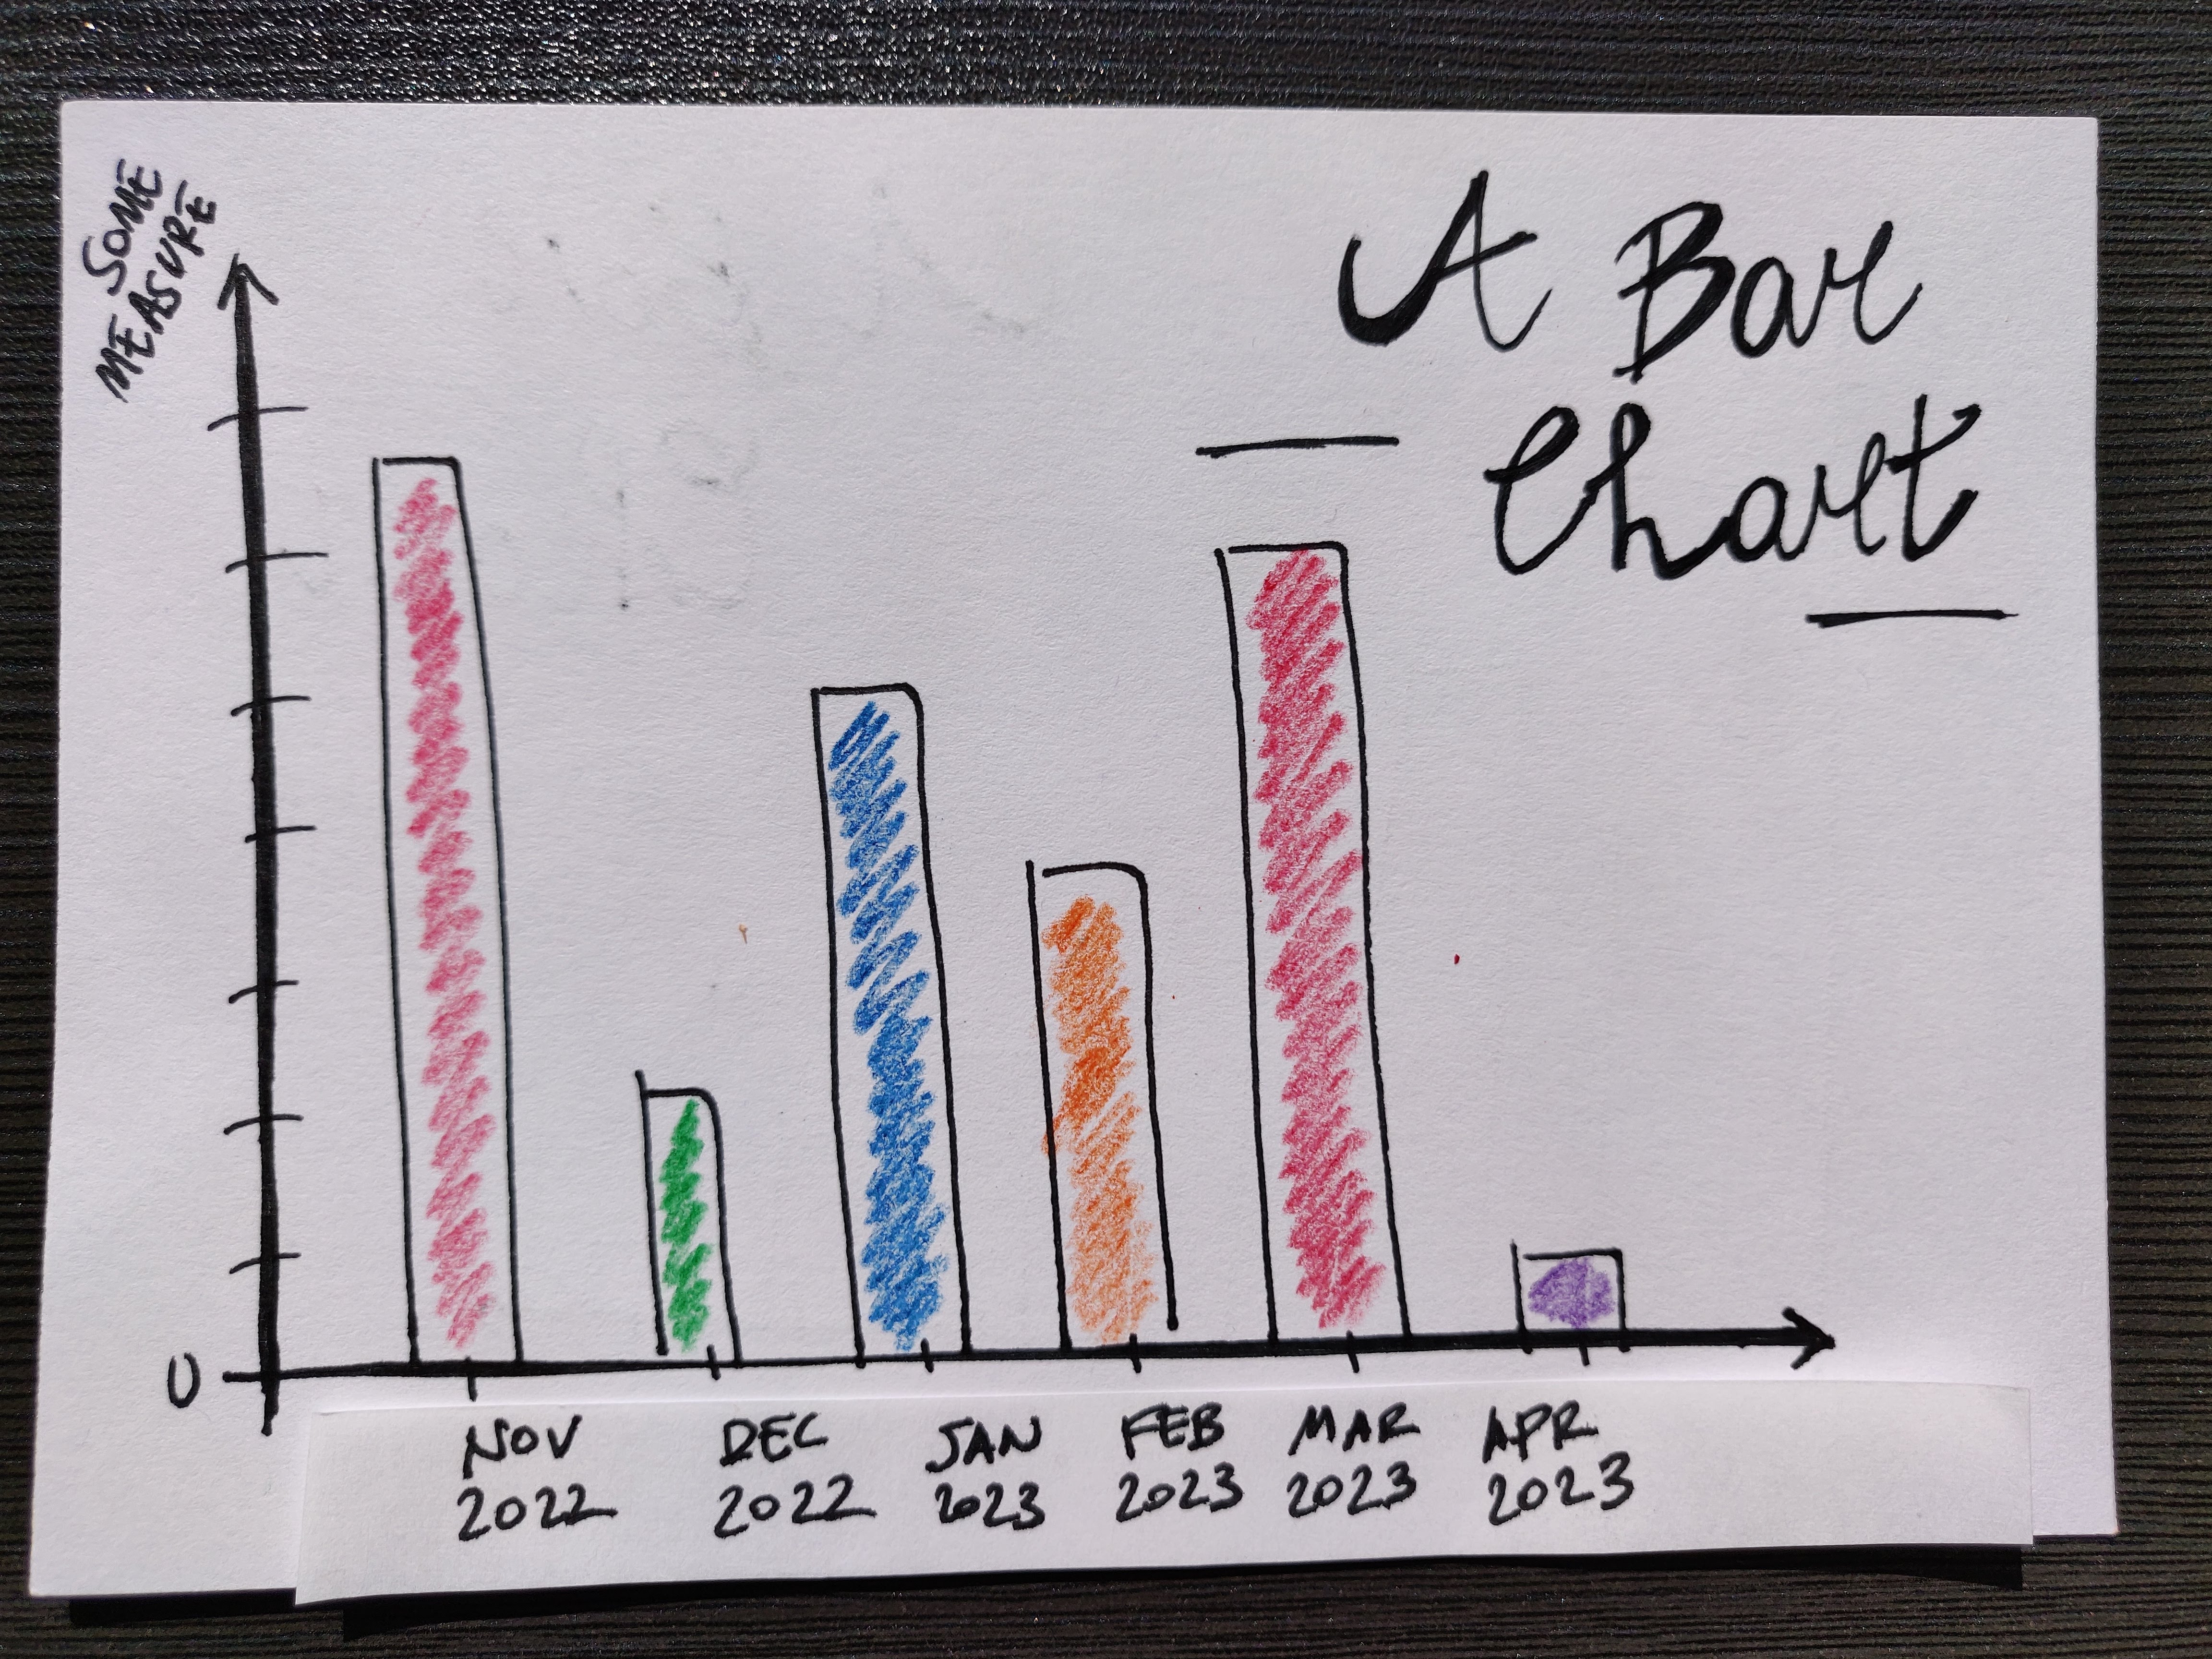 A simple bar chart, hand-drawn, with months on the x-axis and coloured bars.